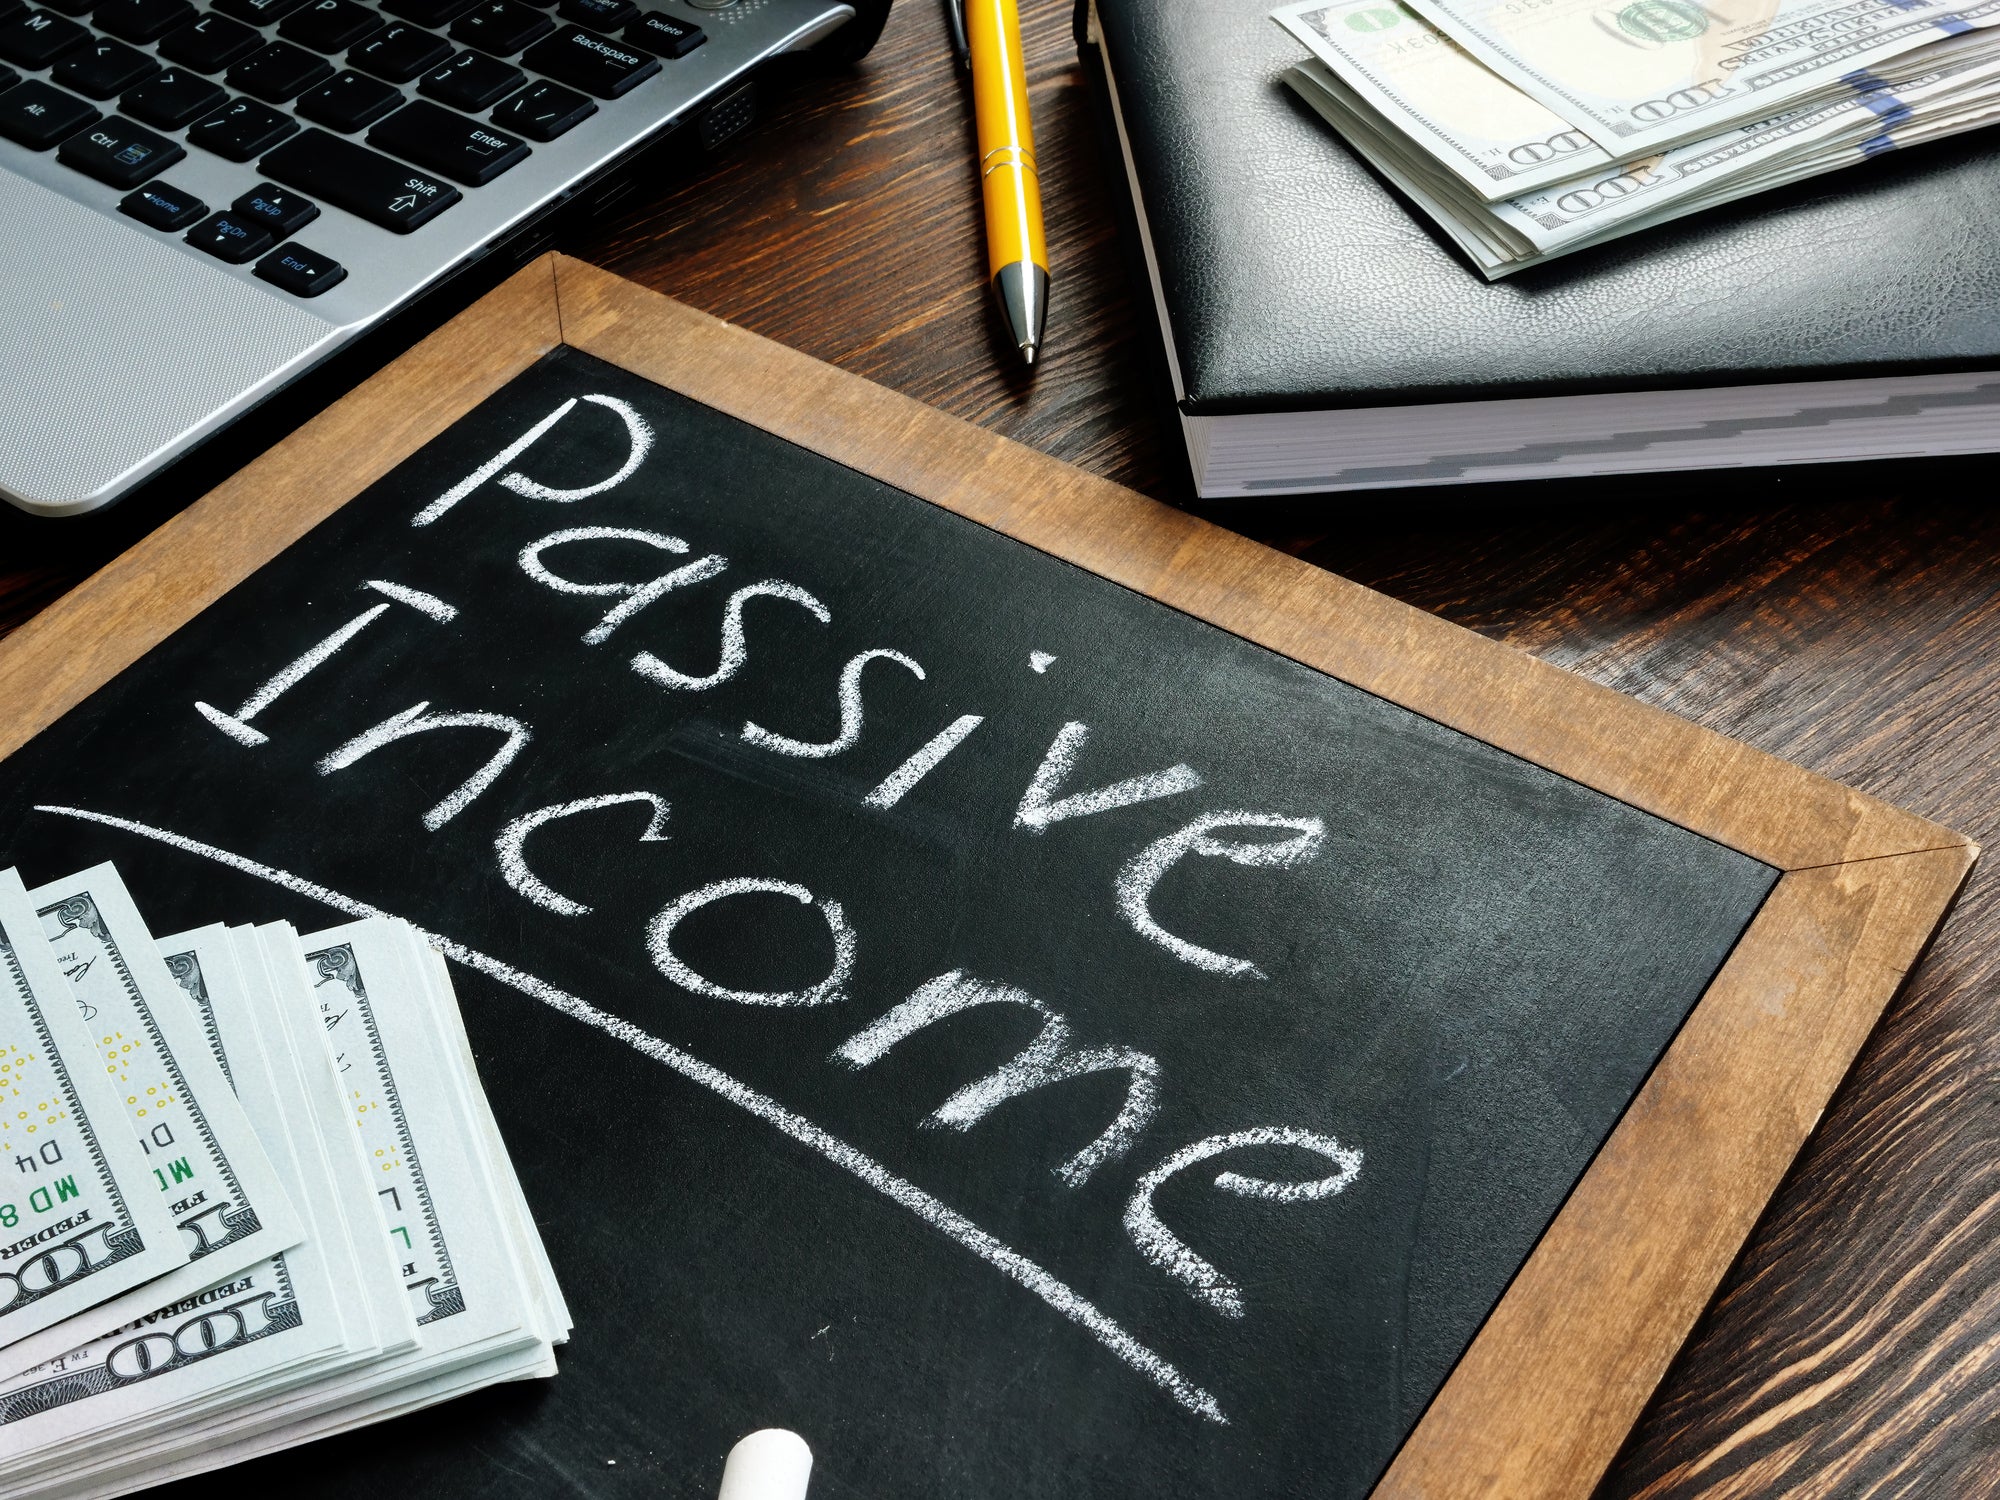 Want $1,000 in Passive Income? Invest $3,750 in These 3 Stocks and Wait 5 Years